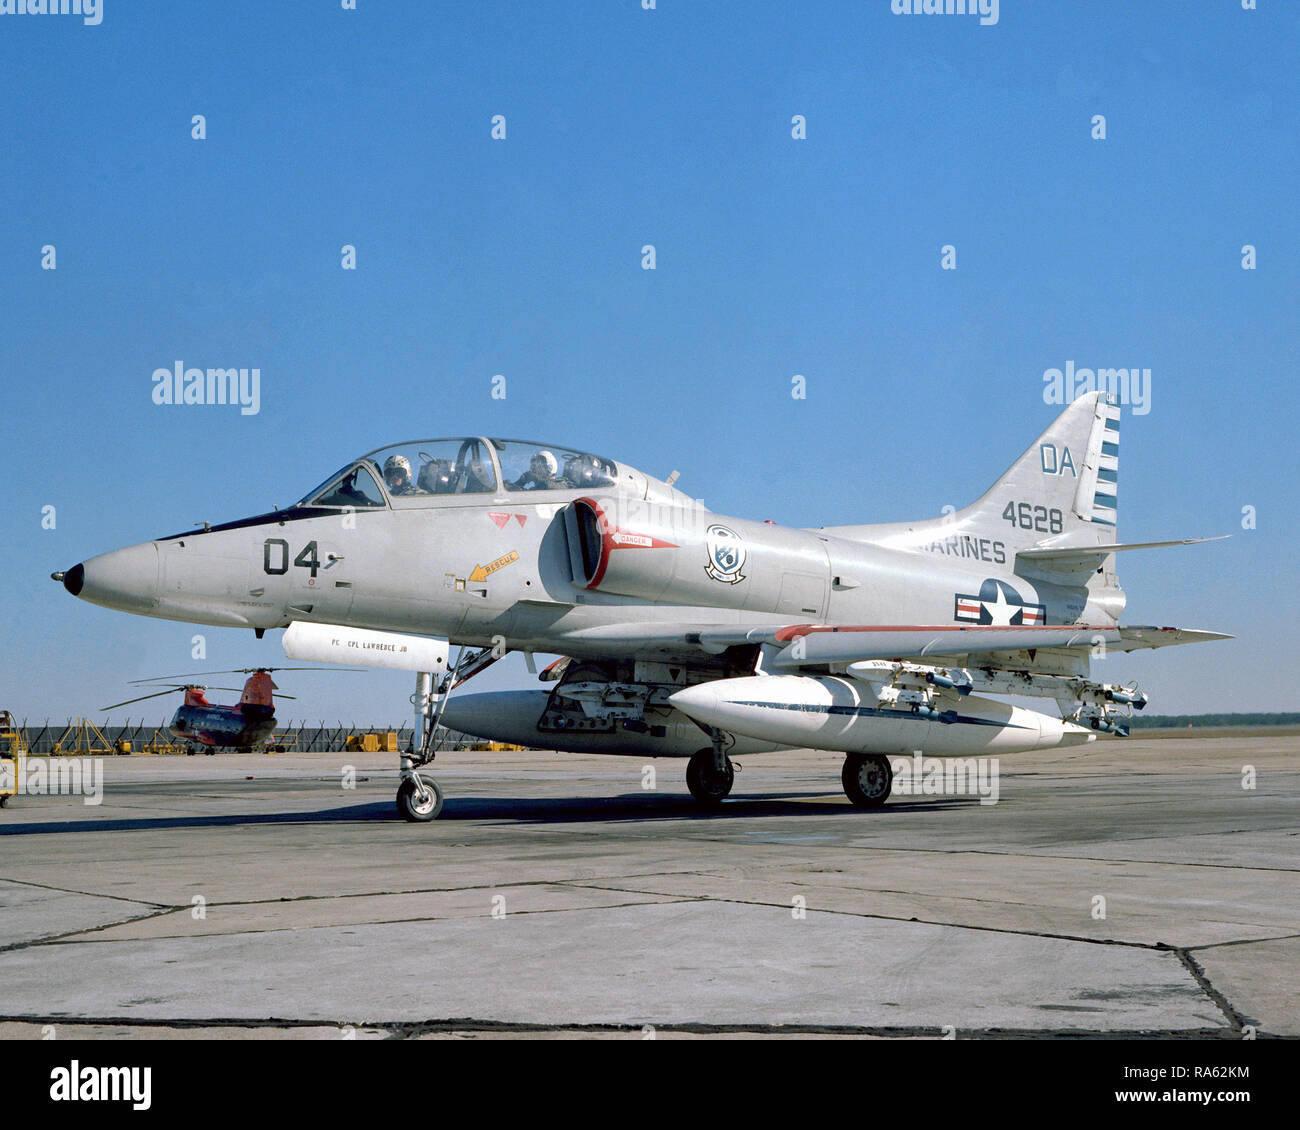 1978 - A left side view of a Marine TA-4F Skyhawk aircraft preparing to taxi from the flight line.  The TA-4F is from the Headquarters and Maintenance Squadron-32. Stock Photo